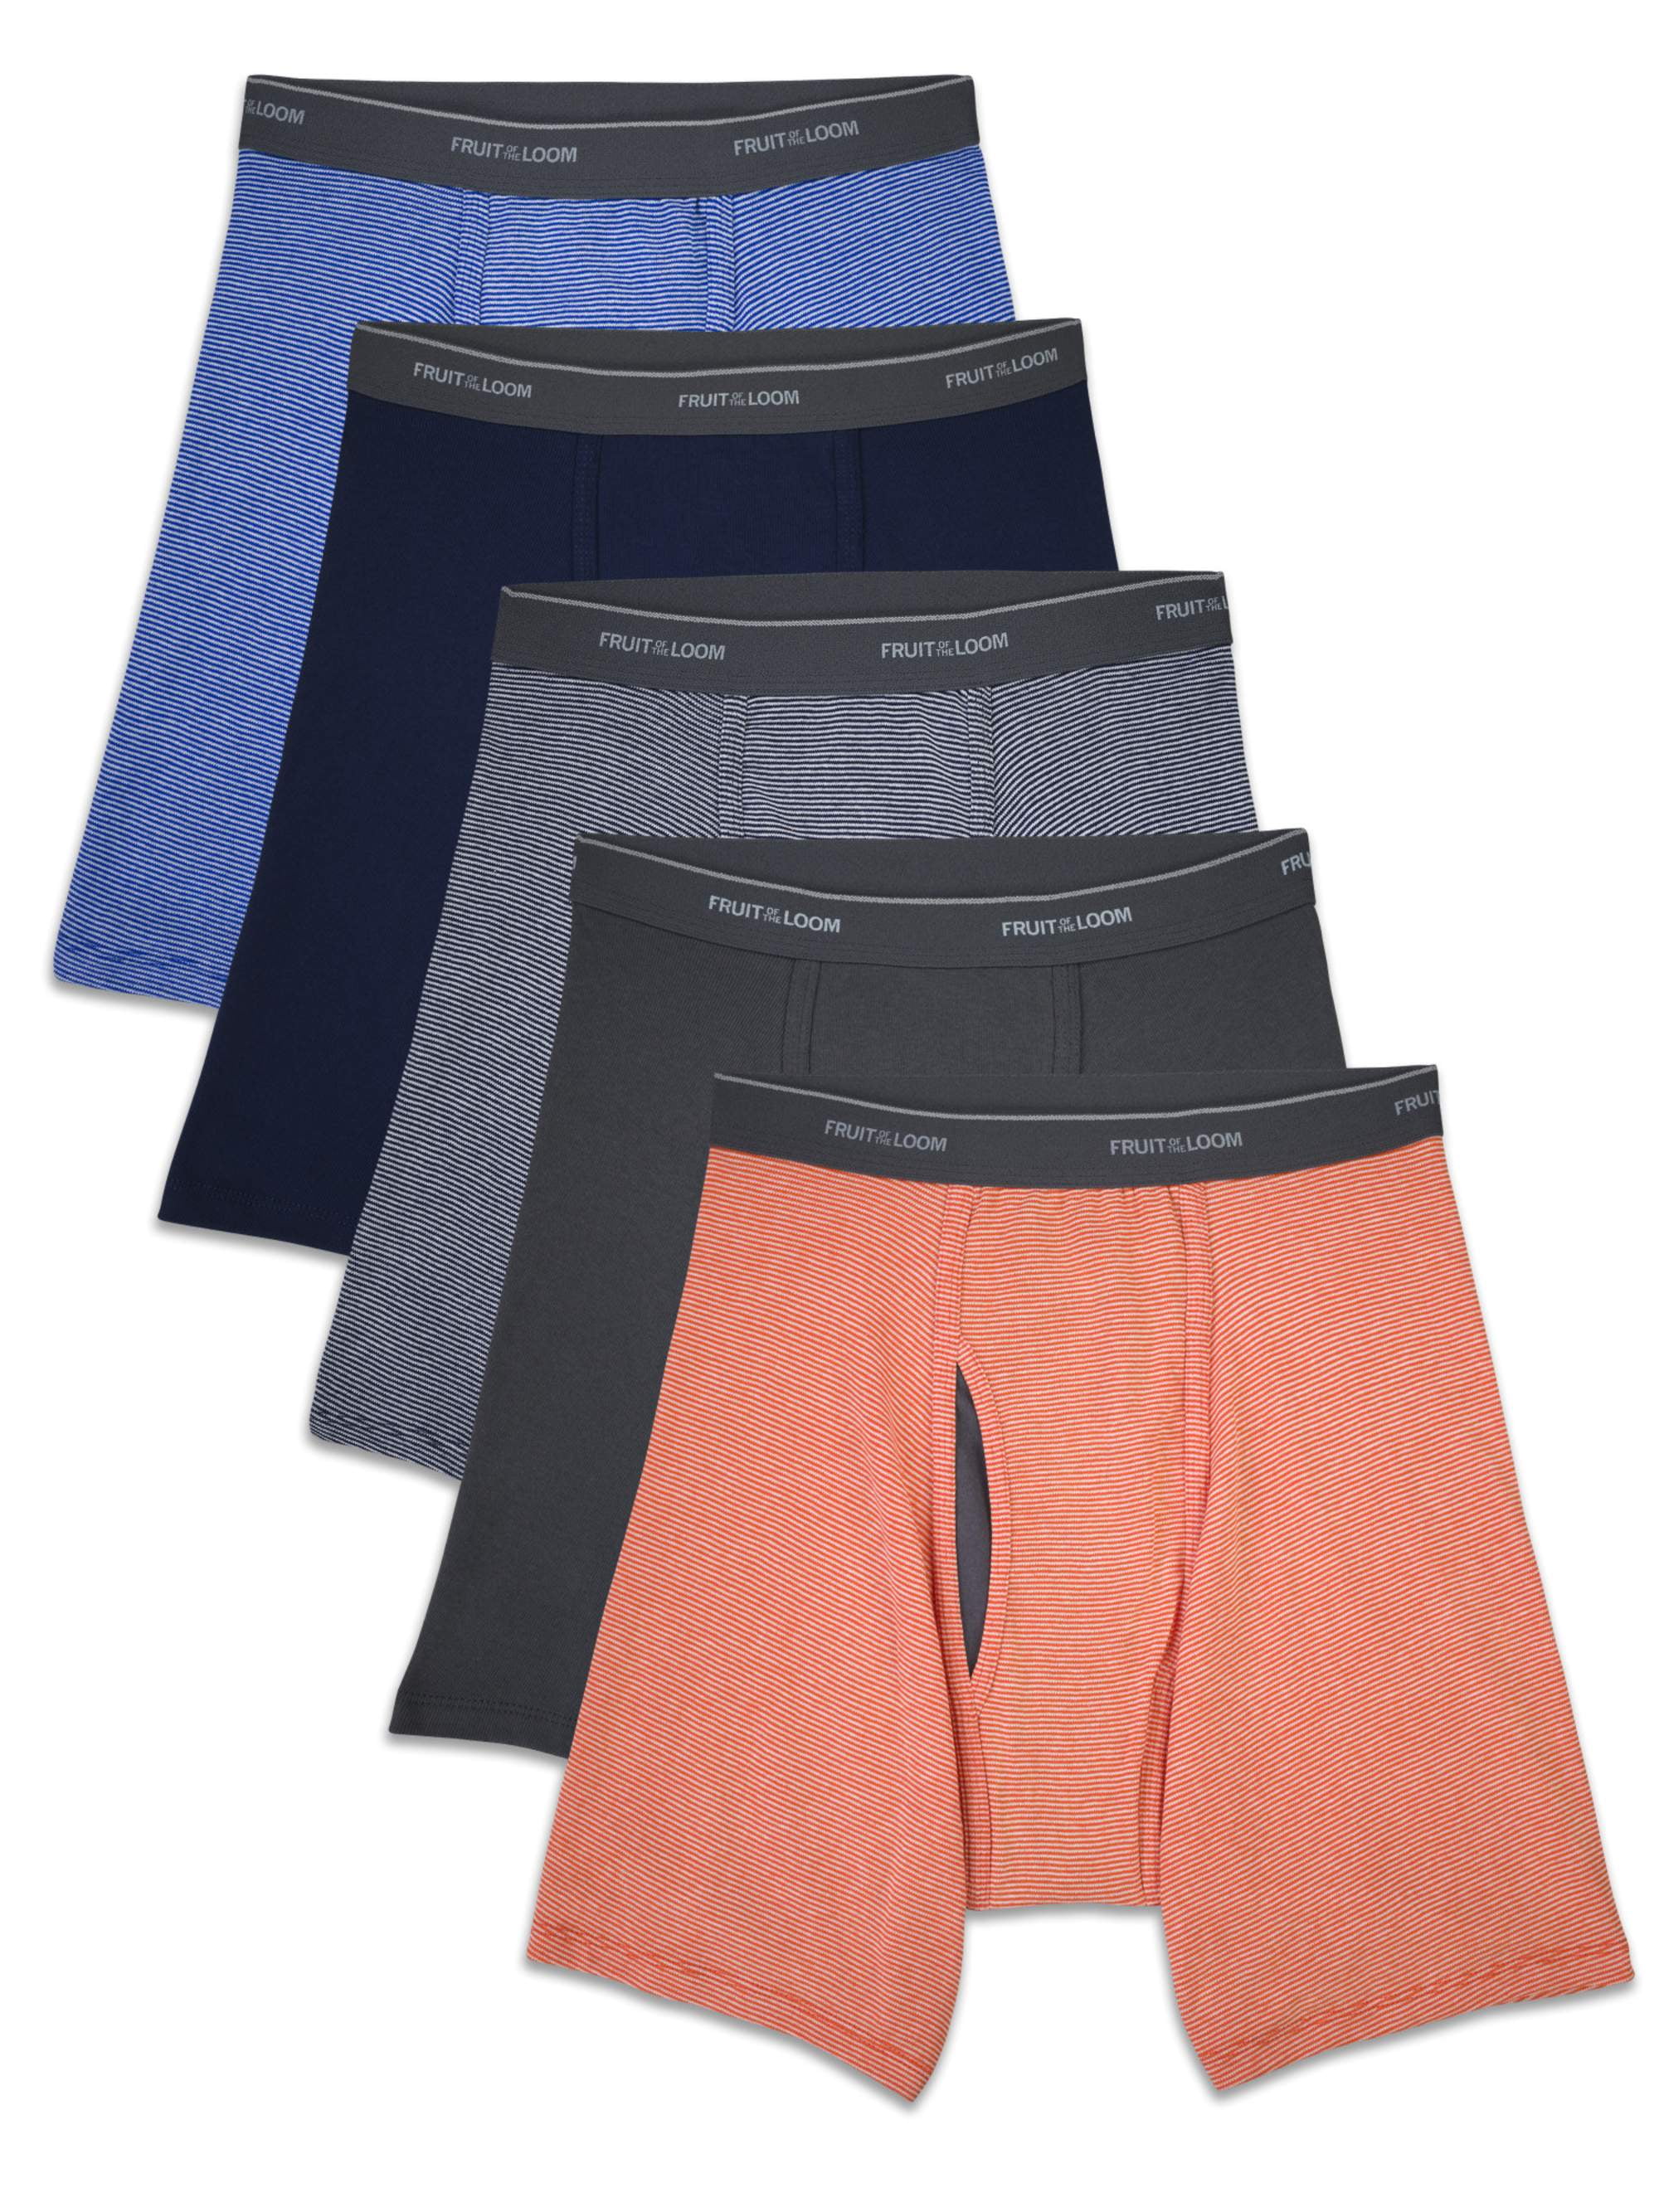 Fruit of the Loom - Fruit of the Loom Men's CoolZone Fly Dual Defense ...